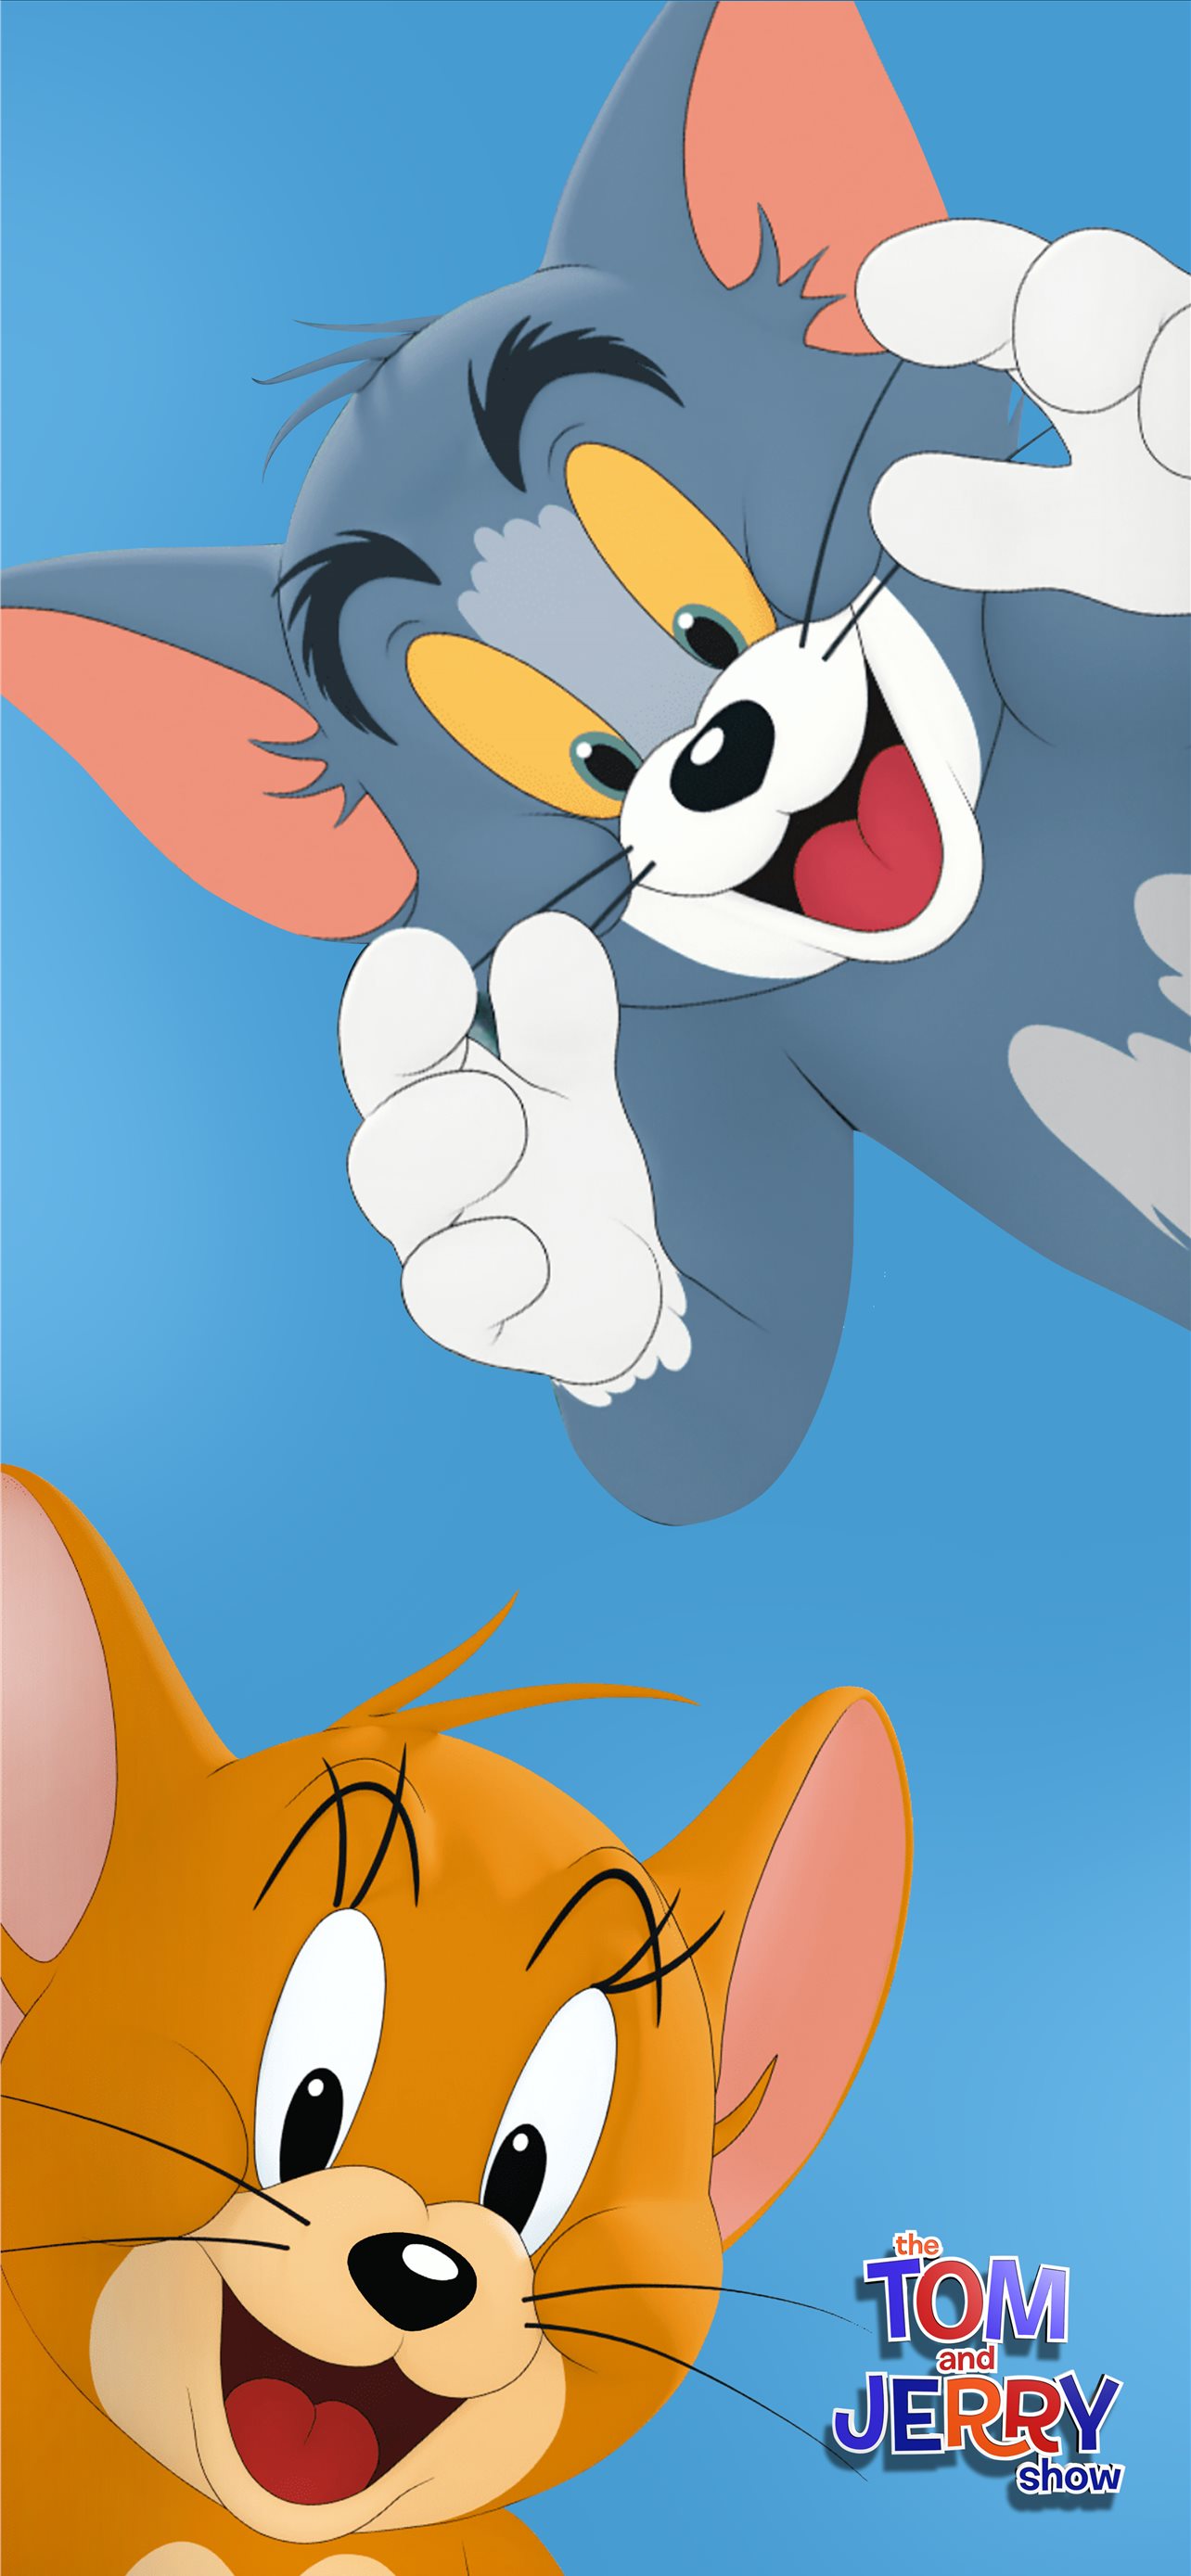 The Tom and Jerry Show iPhone Wallpaper Free Download